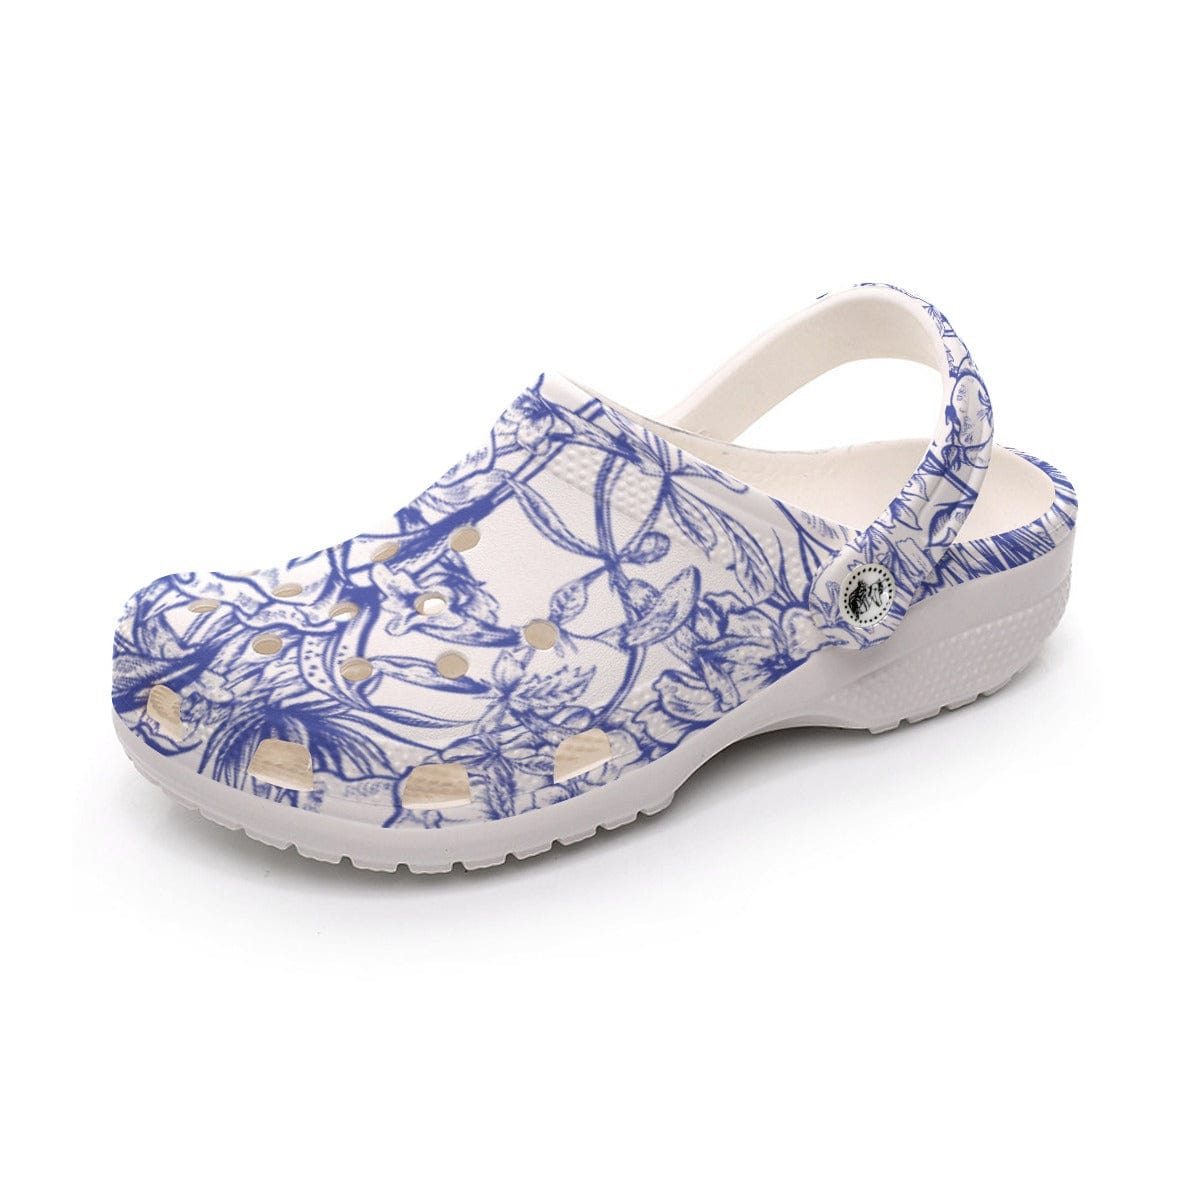 Yoycol Pedal Pops Periwinkle Luxe - Print Women's Classic Clogs